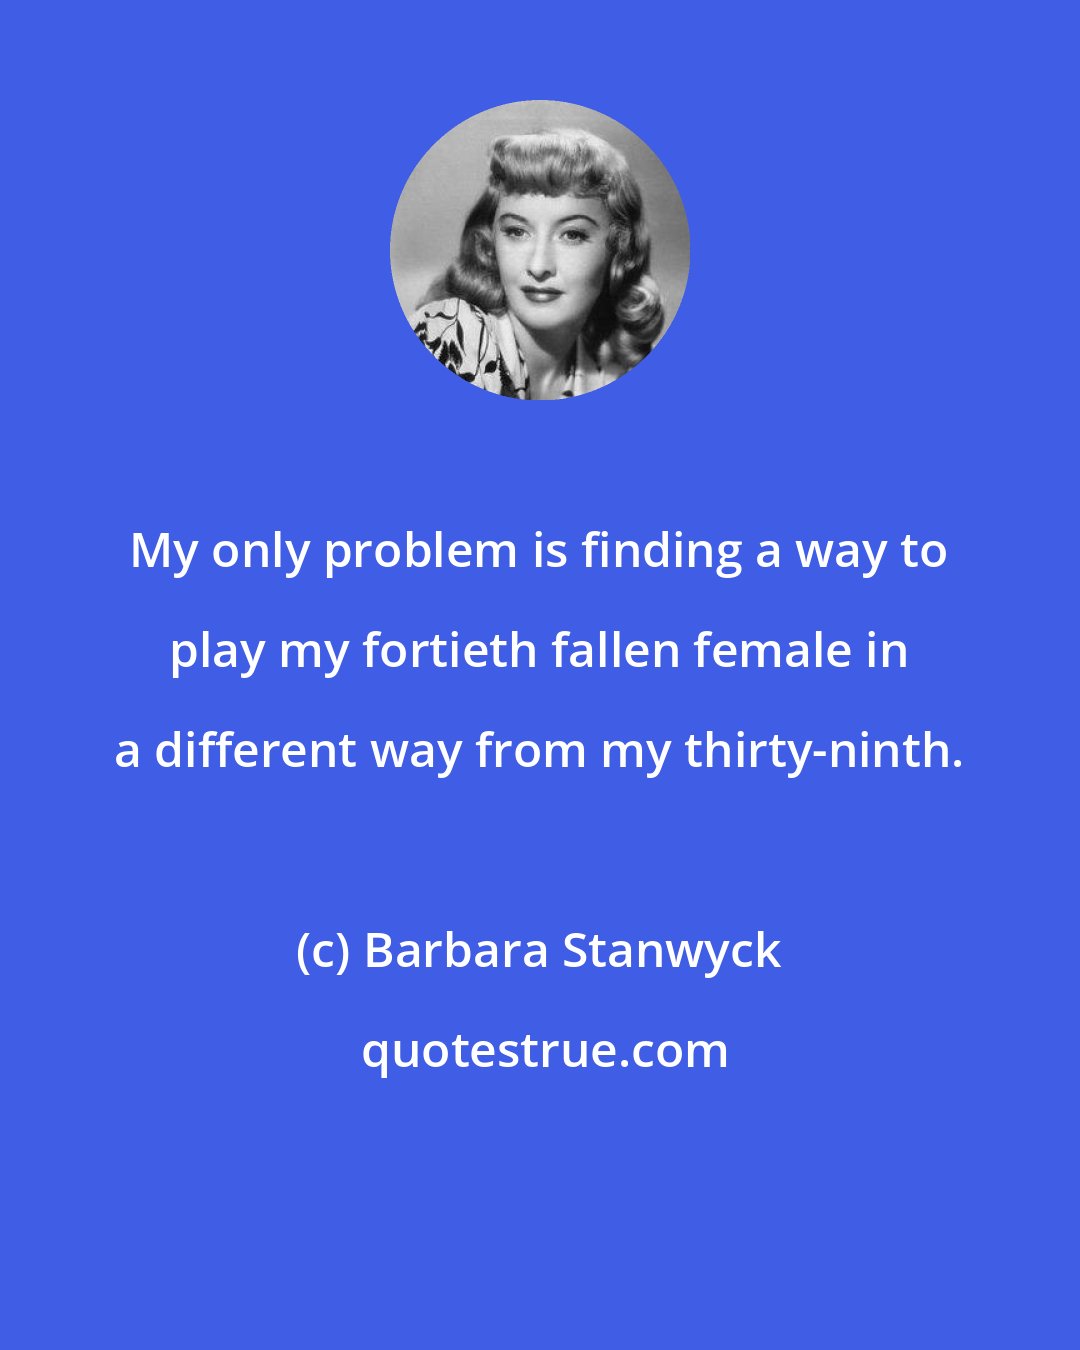 Barbara Stanwyck: My only problem is finding a way to play my fortieth fallen female in a different way from my thirty-ninth.